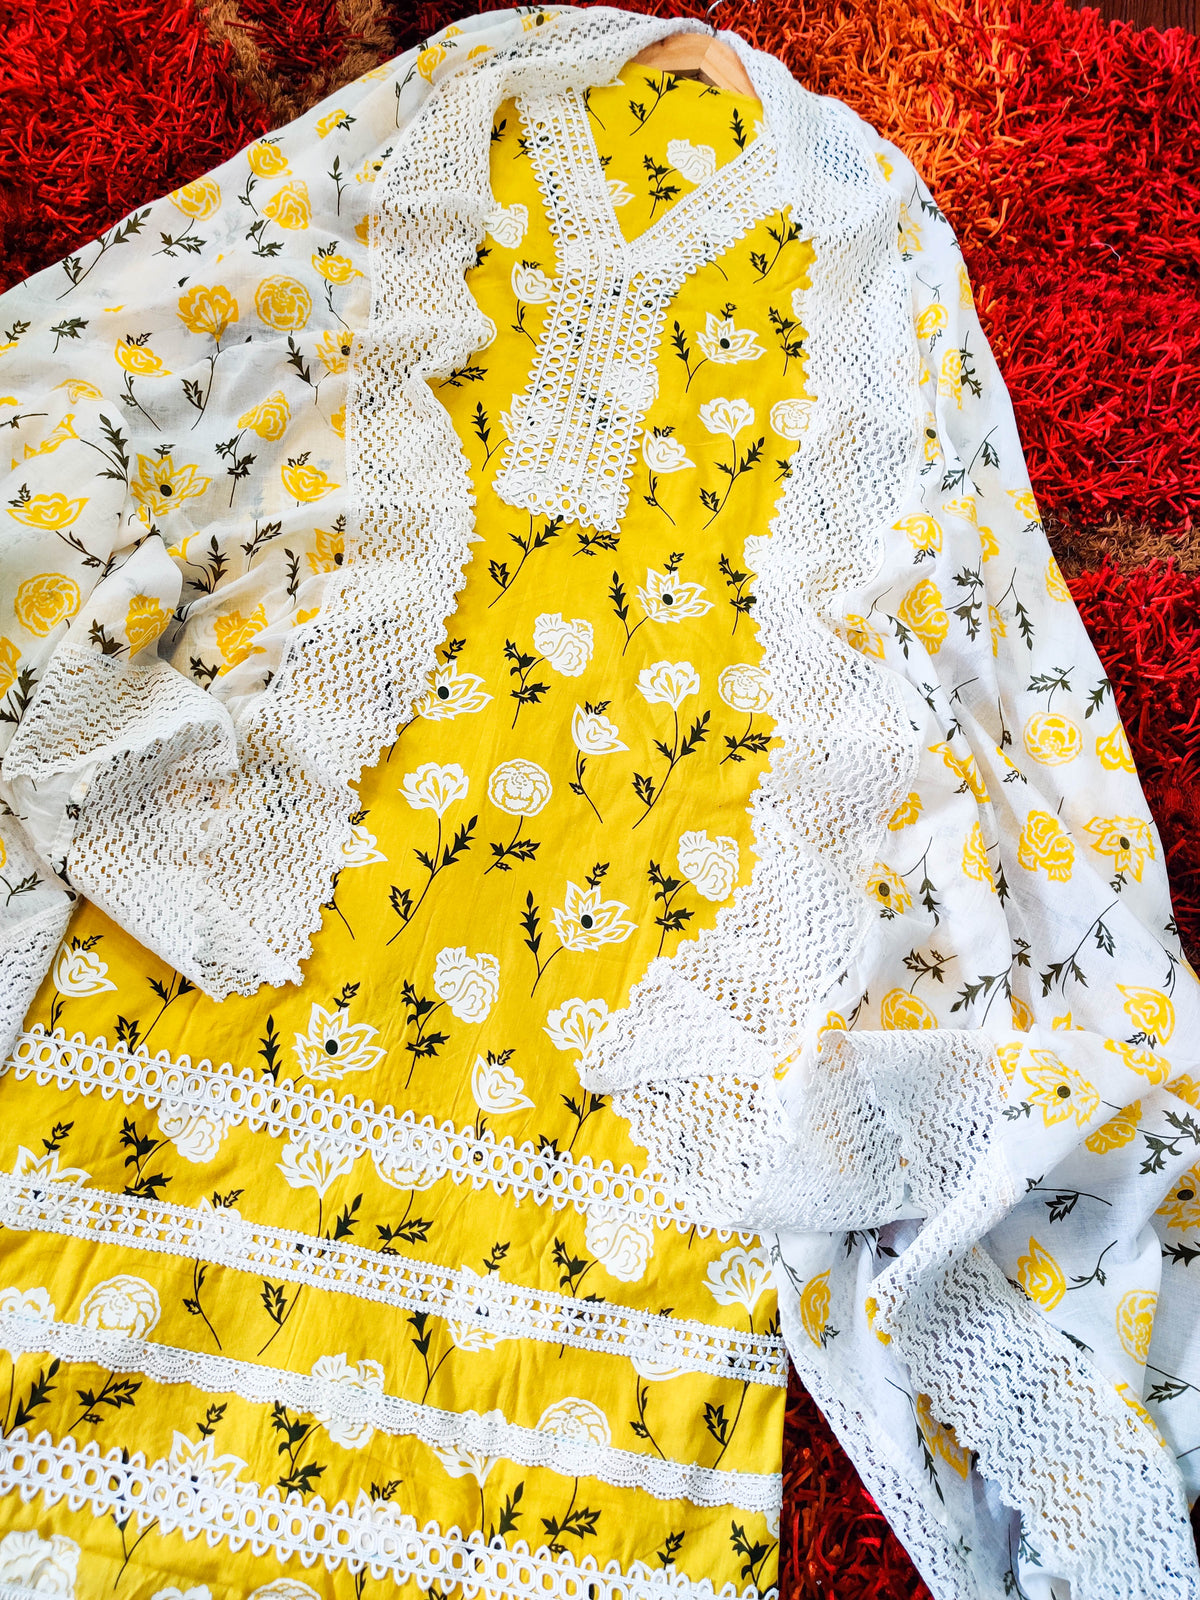 Yellow Printed Unstitched Dress Material Kurta Set with Delicate White Lace Accents